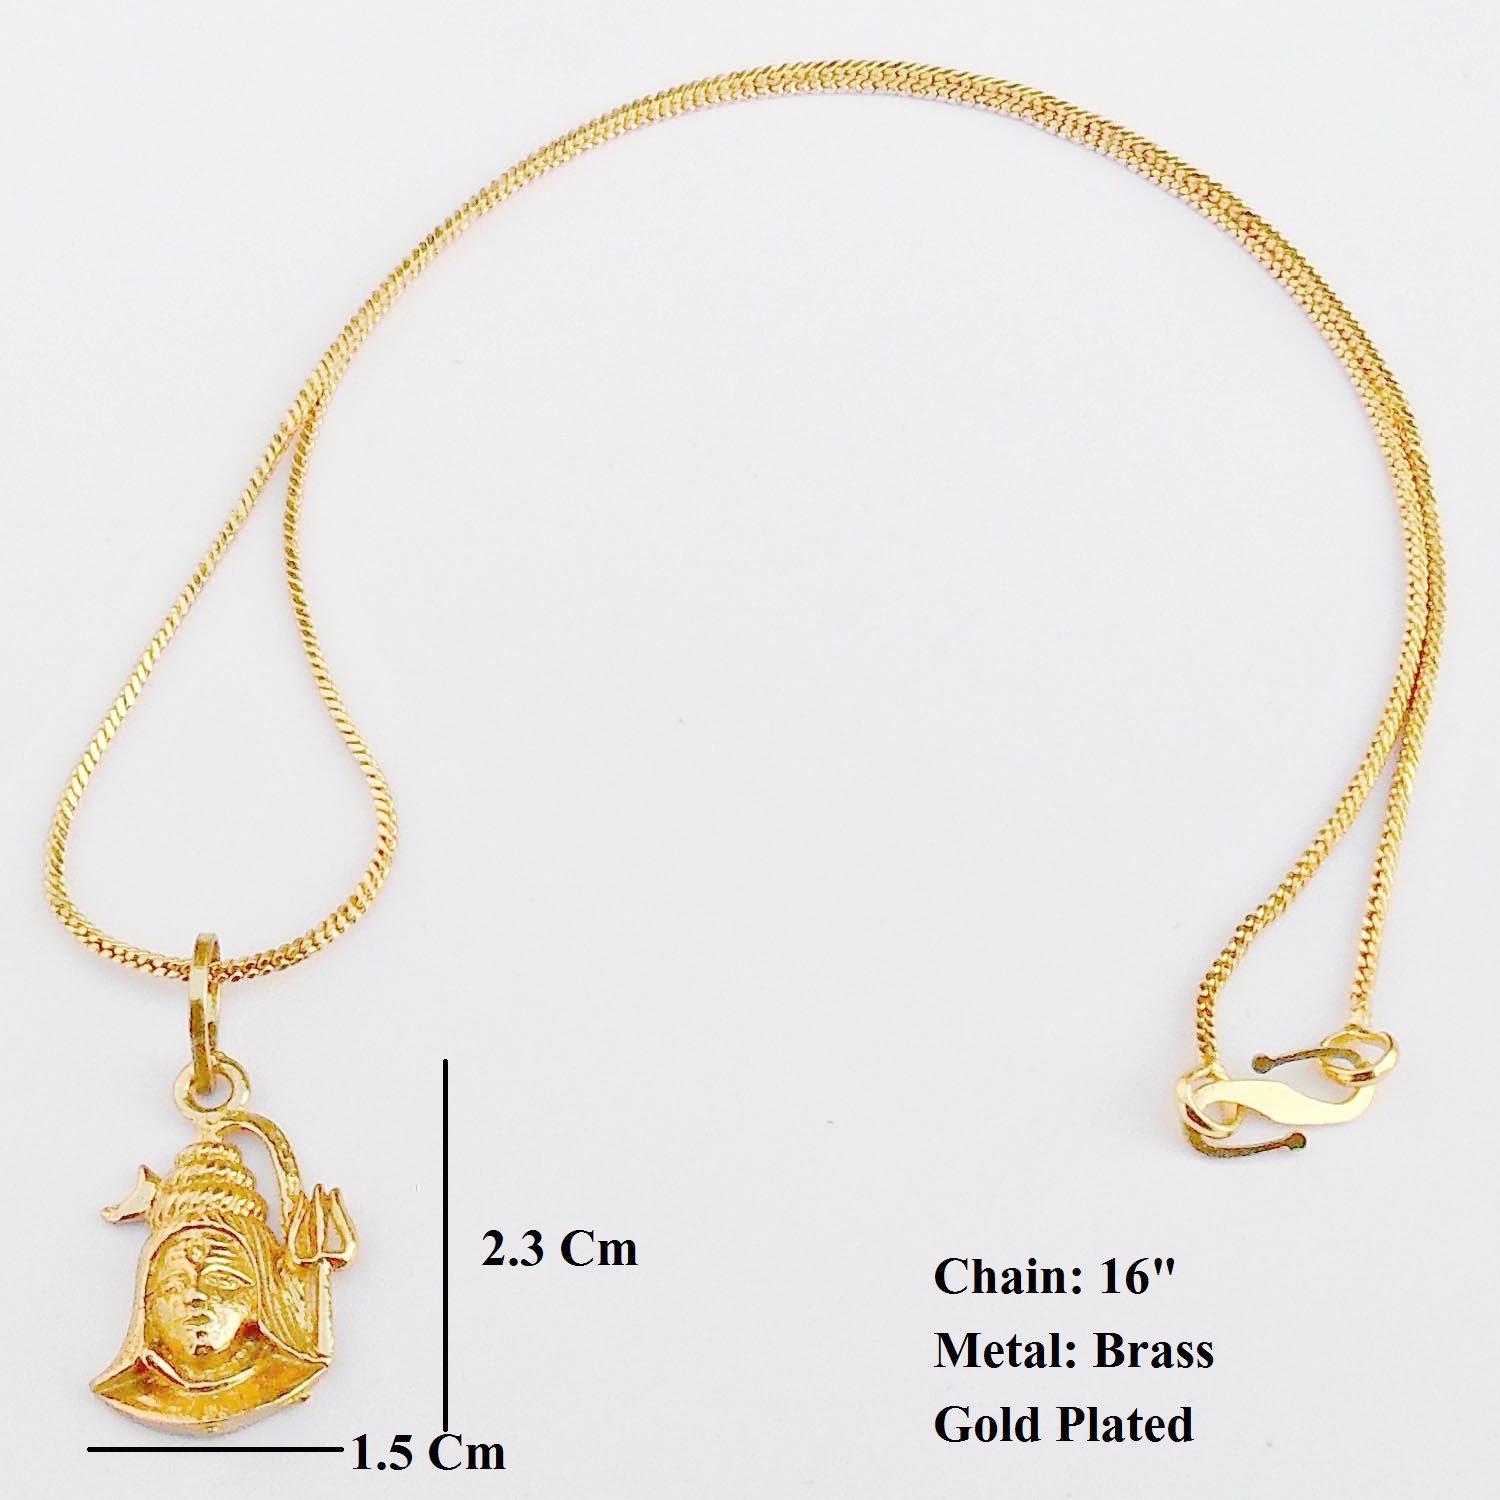 Buy Shiva Gold Plated Religious God Pendant with Chain for Men Women ...